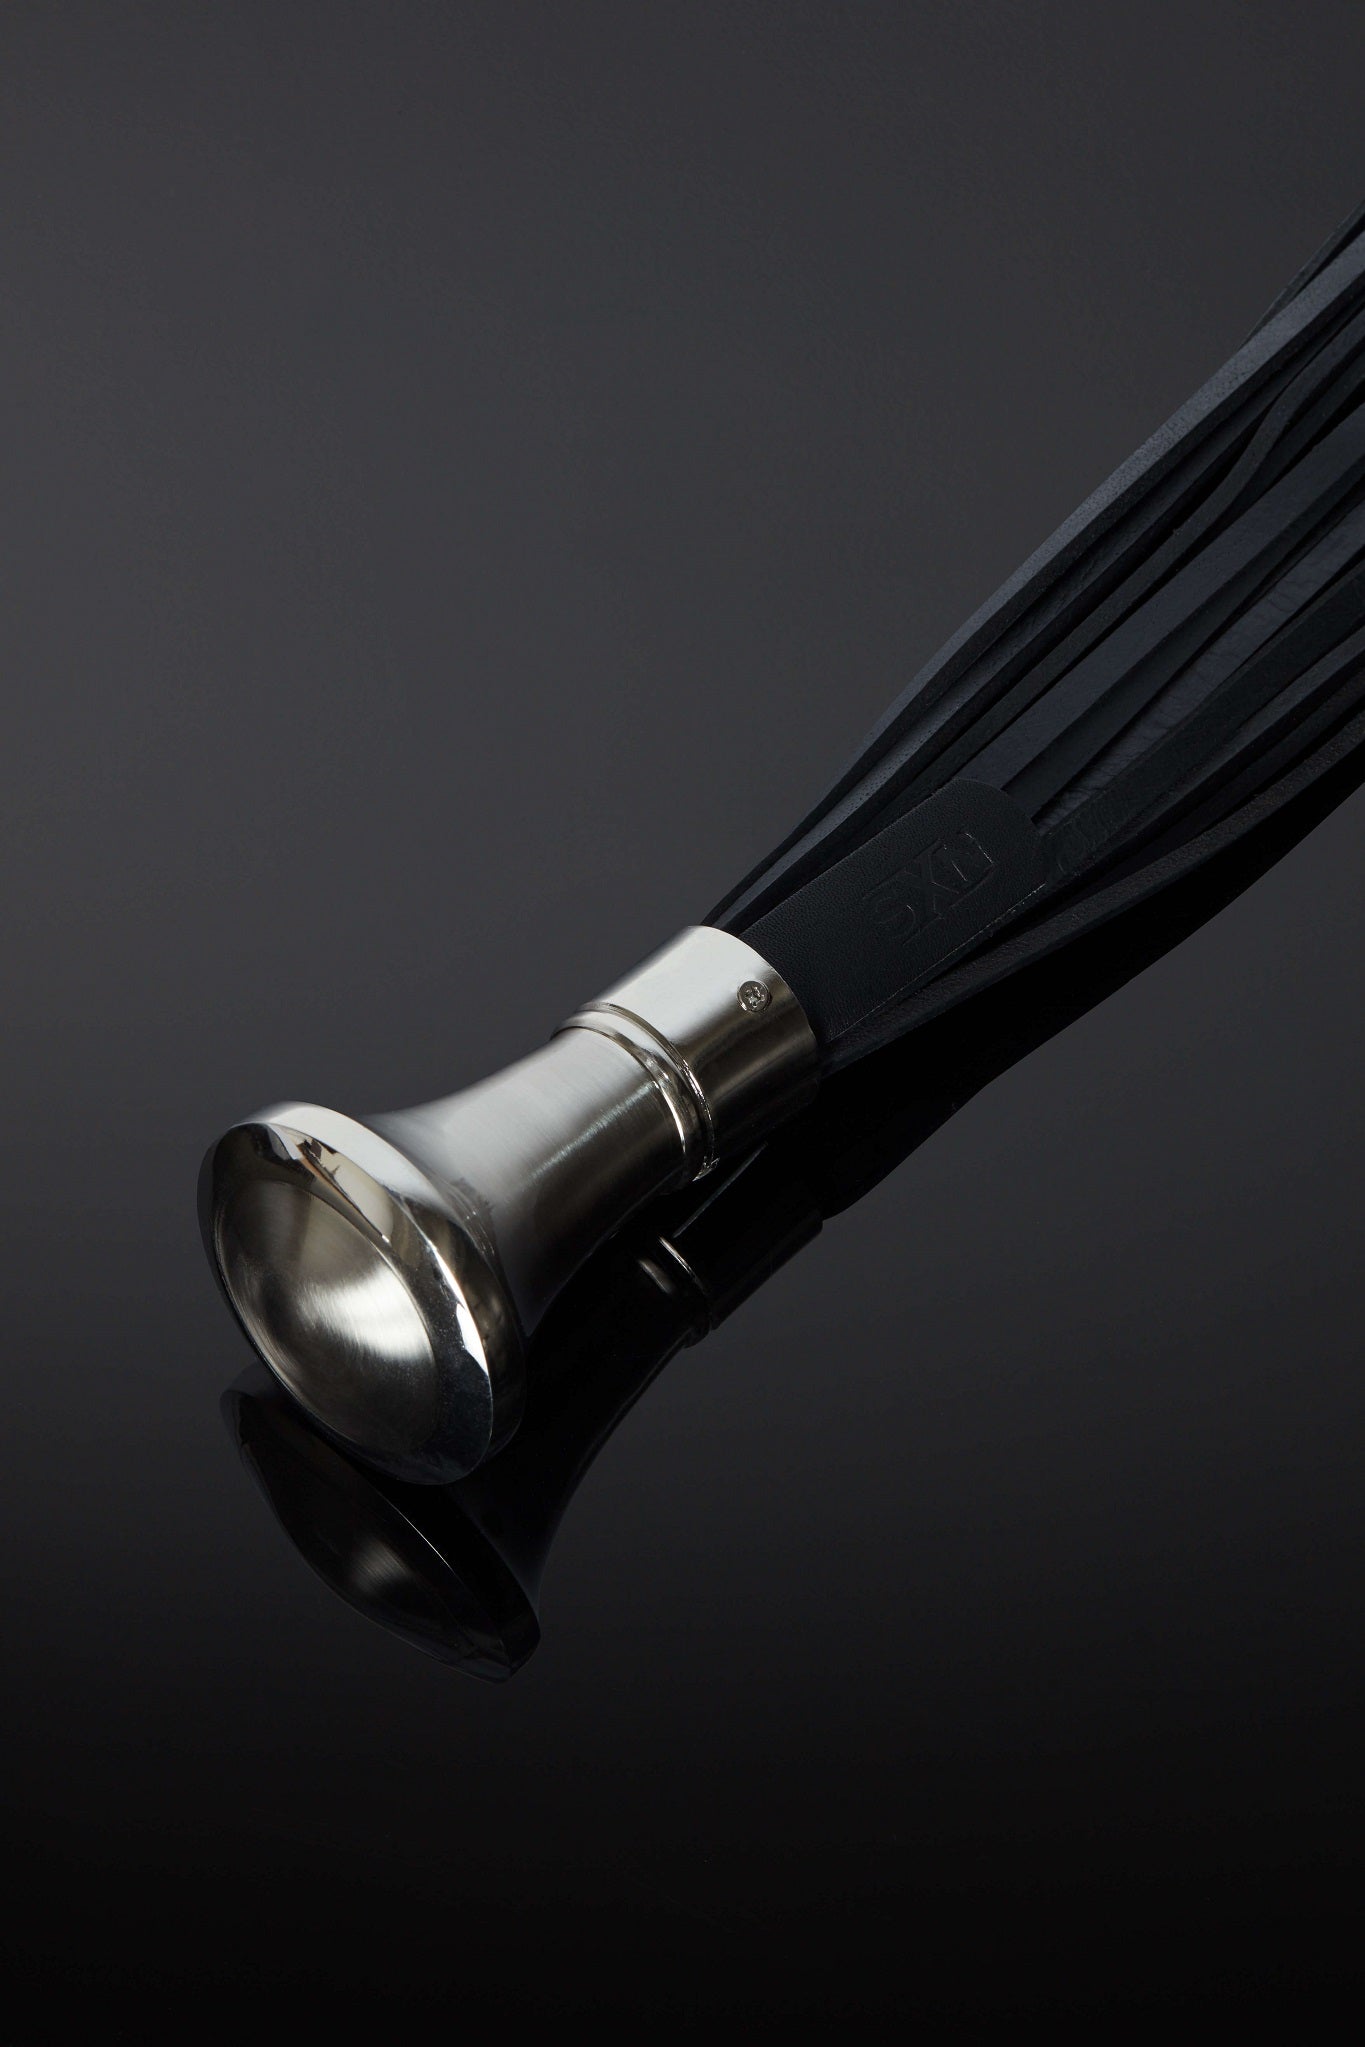 The Dyonis Leather Flogger photo